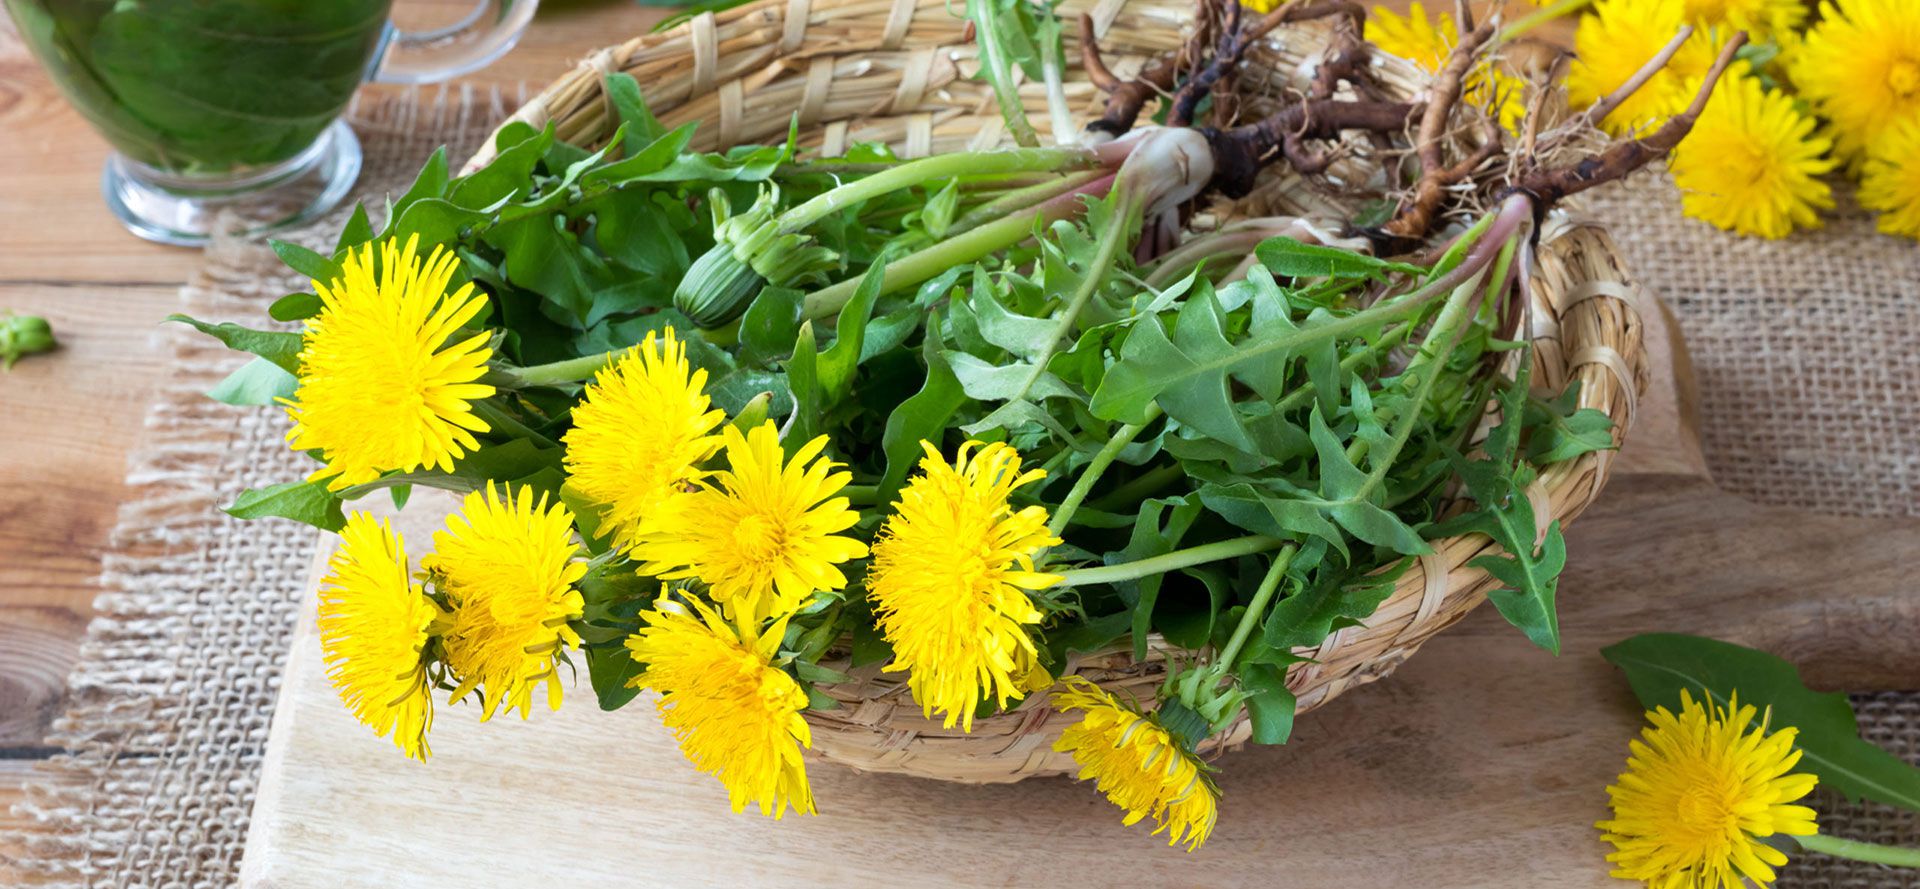 Dandelion Roots And Flowers For Tea For Weight Loss